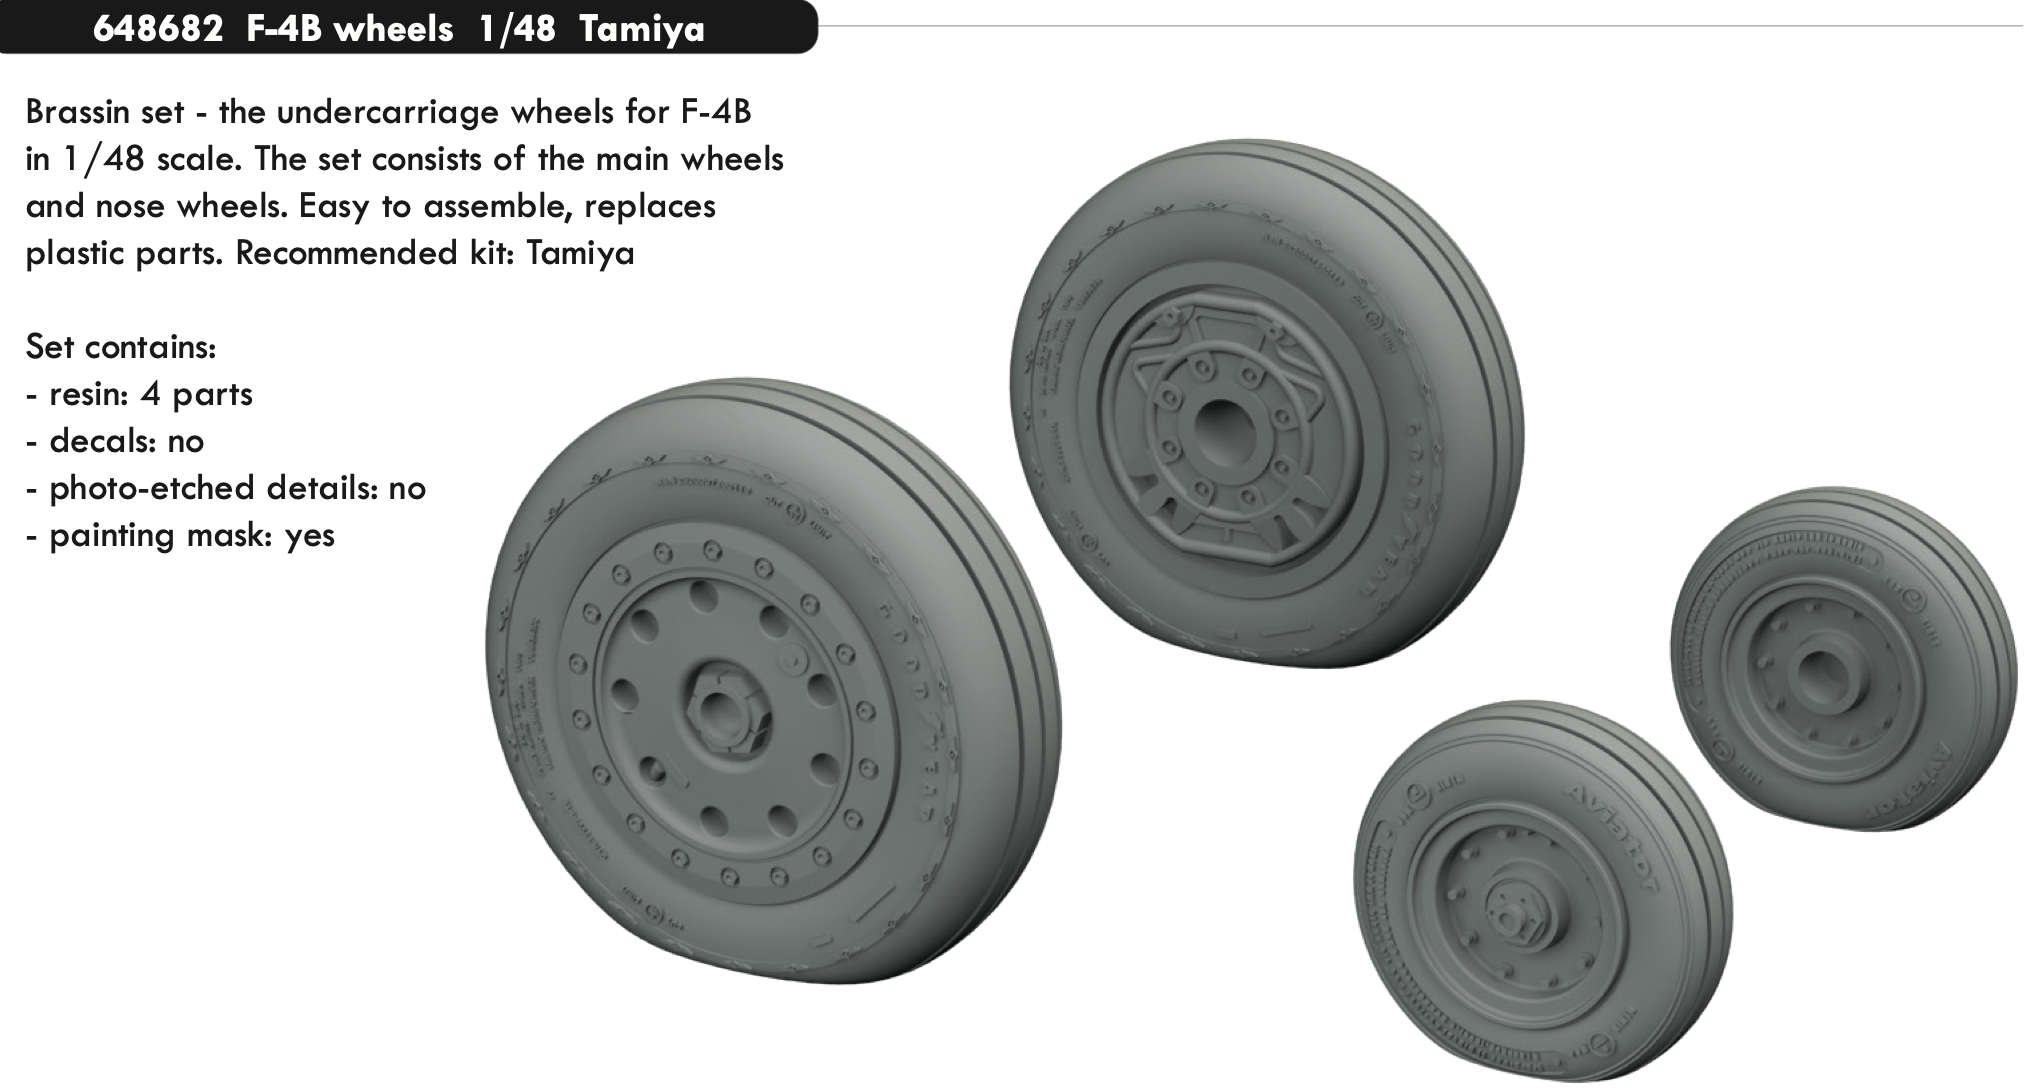 Additions (3D resin printing) 1/48 McDonnell F-4B Phantom wheels with weighted tyre effect (designed to be used with Tamiya kits)